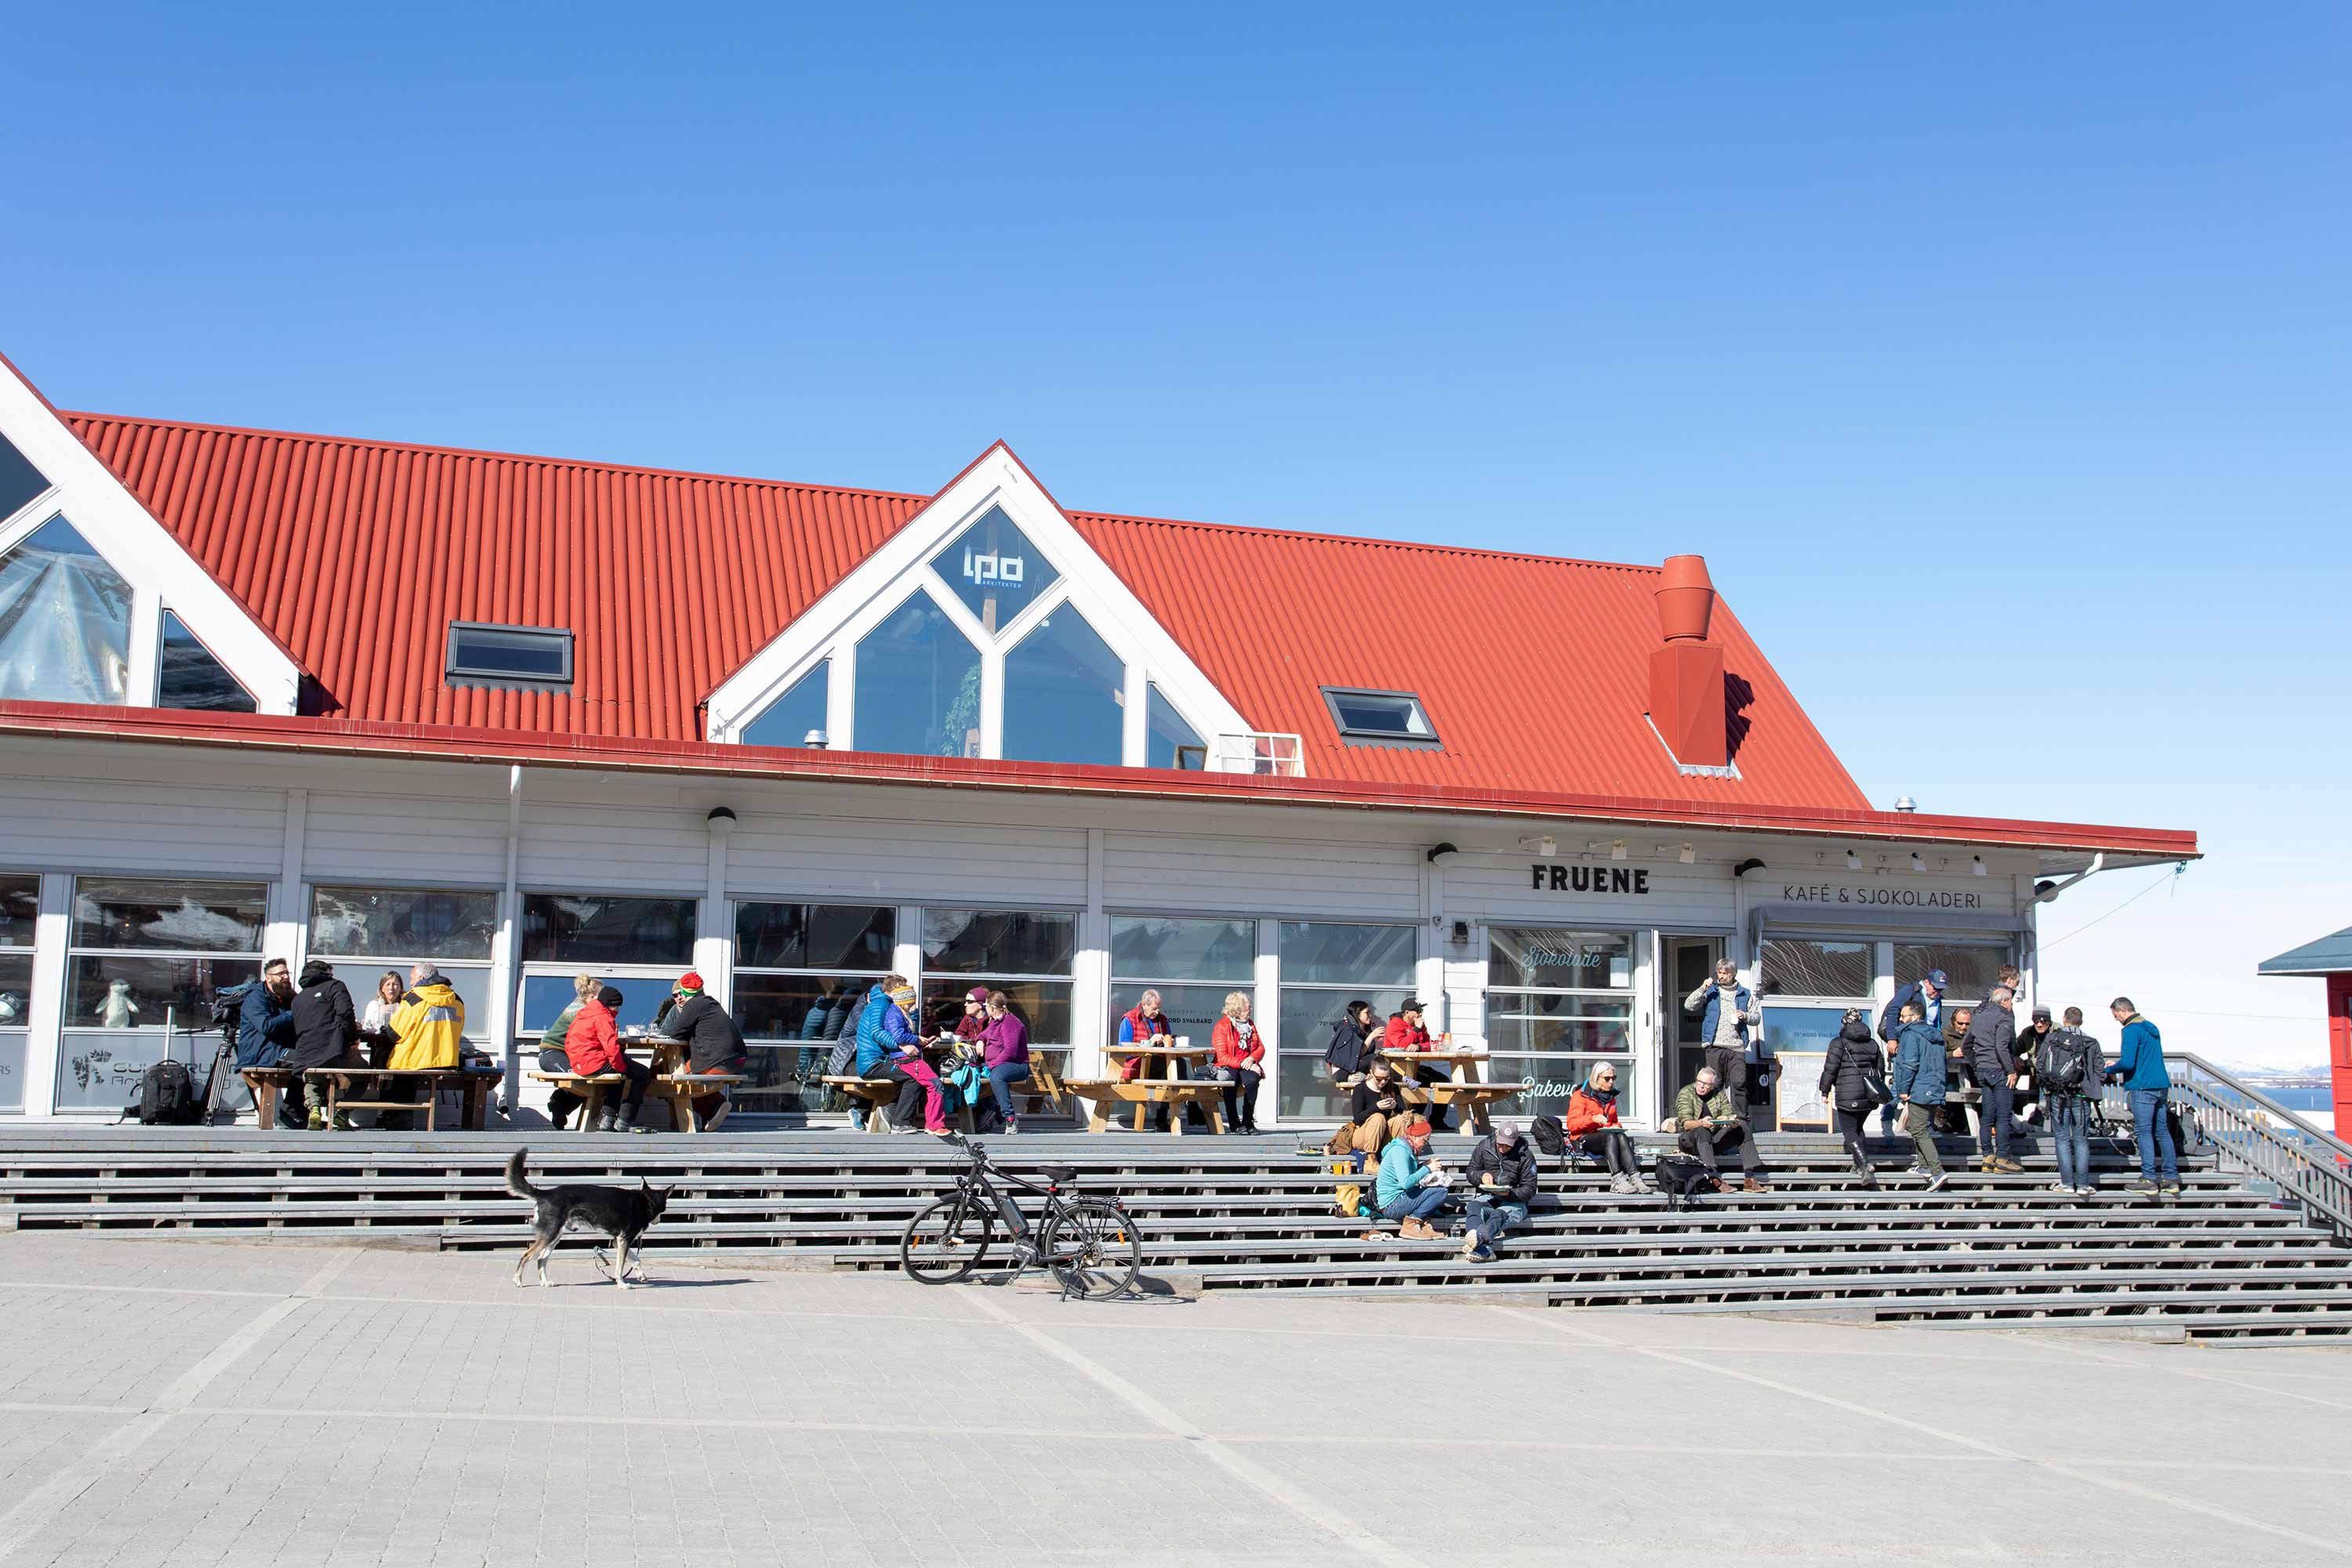 Longyearbyen boasts a small cluster of restaurants and stores in the walkable town centre.